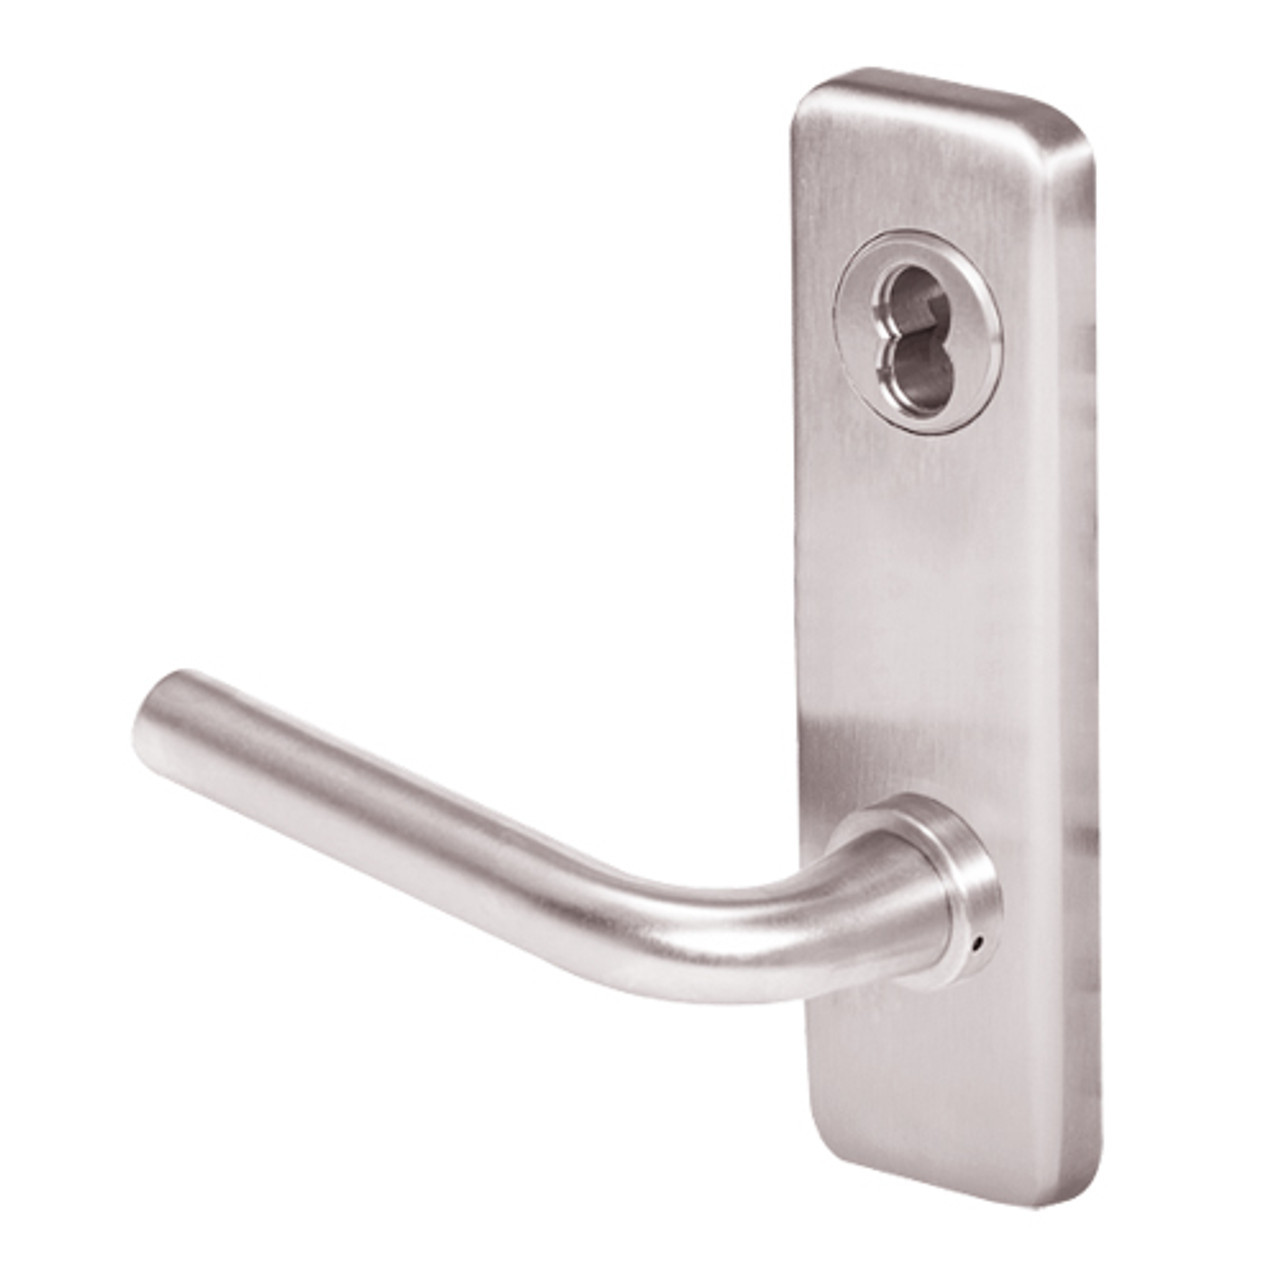 45H0LT12J629VIT Best 40H Series Privacy Heavy Duty Mortise Lever Lock with Solid Tube with No Return in Bright Stainless Steel